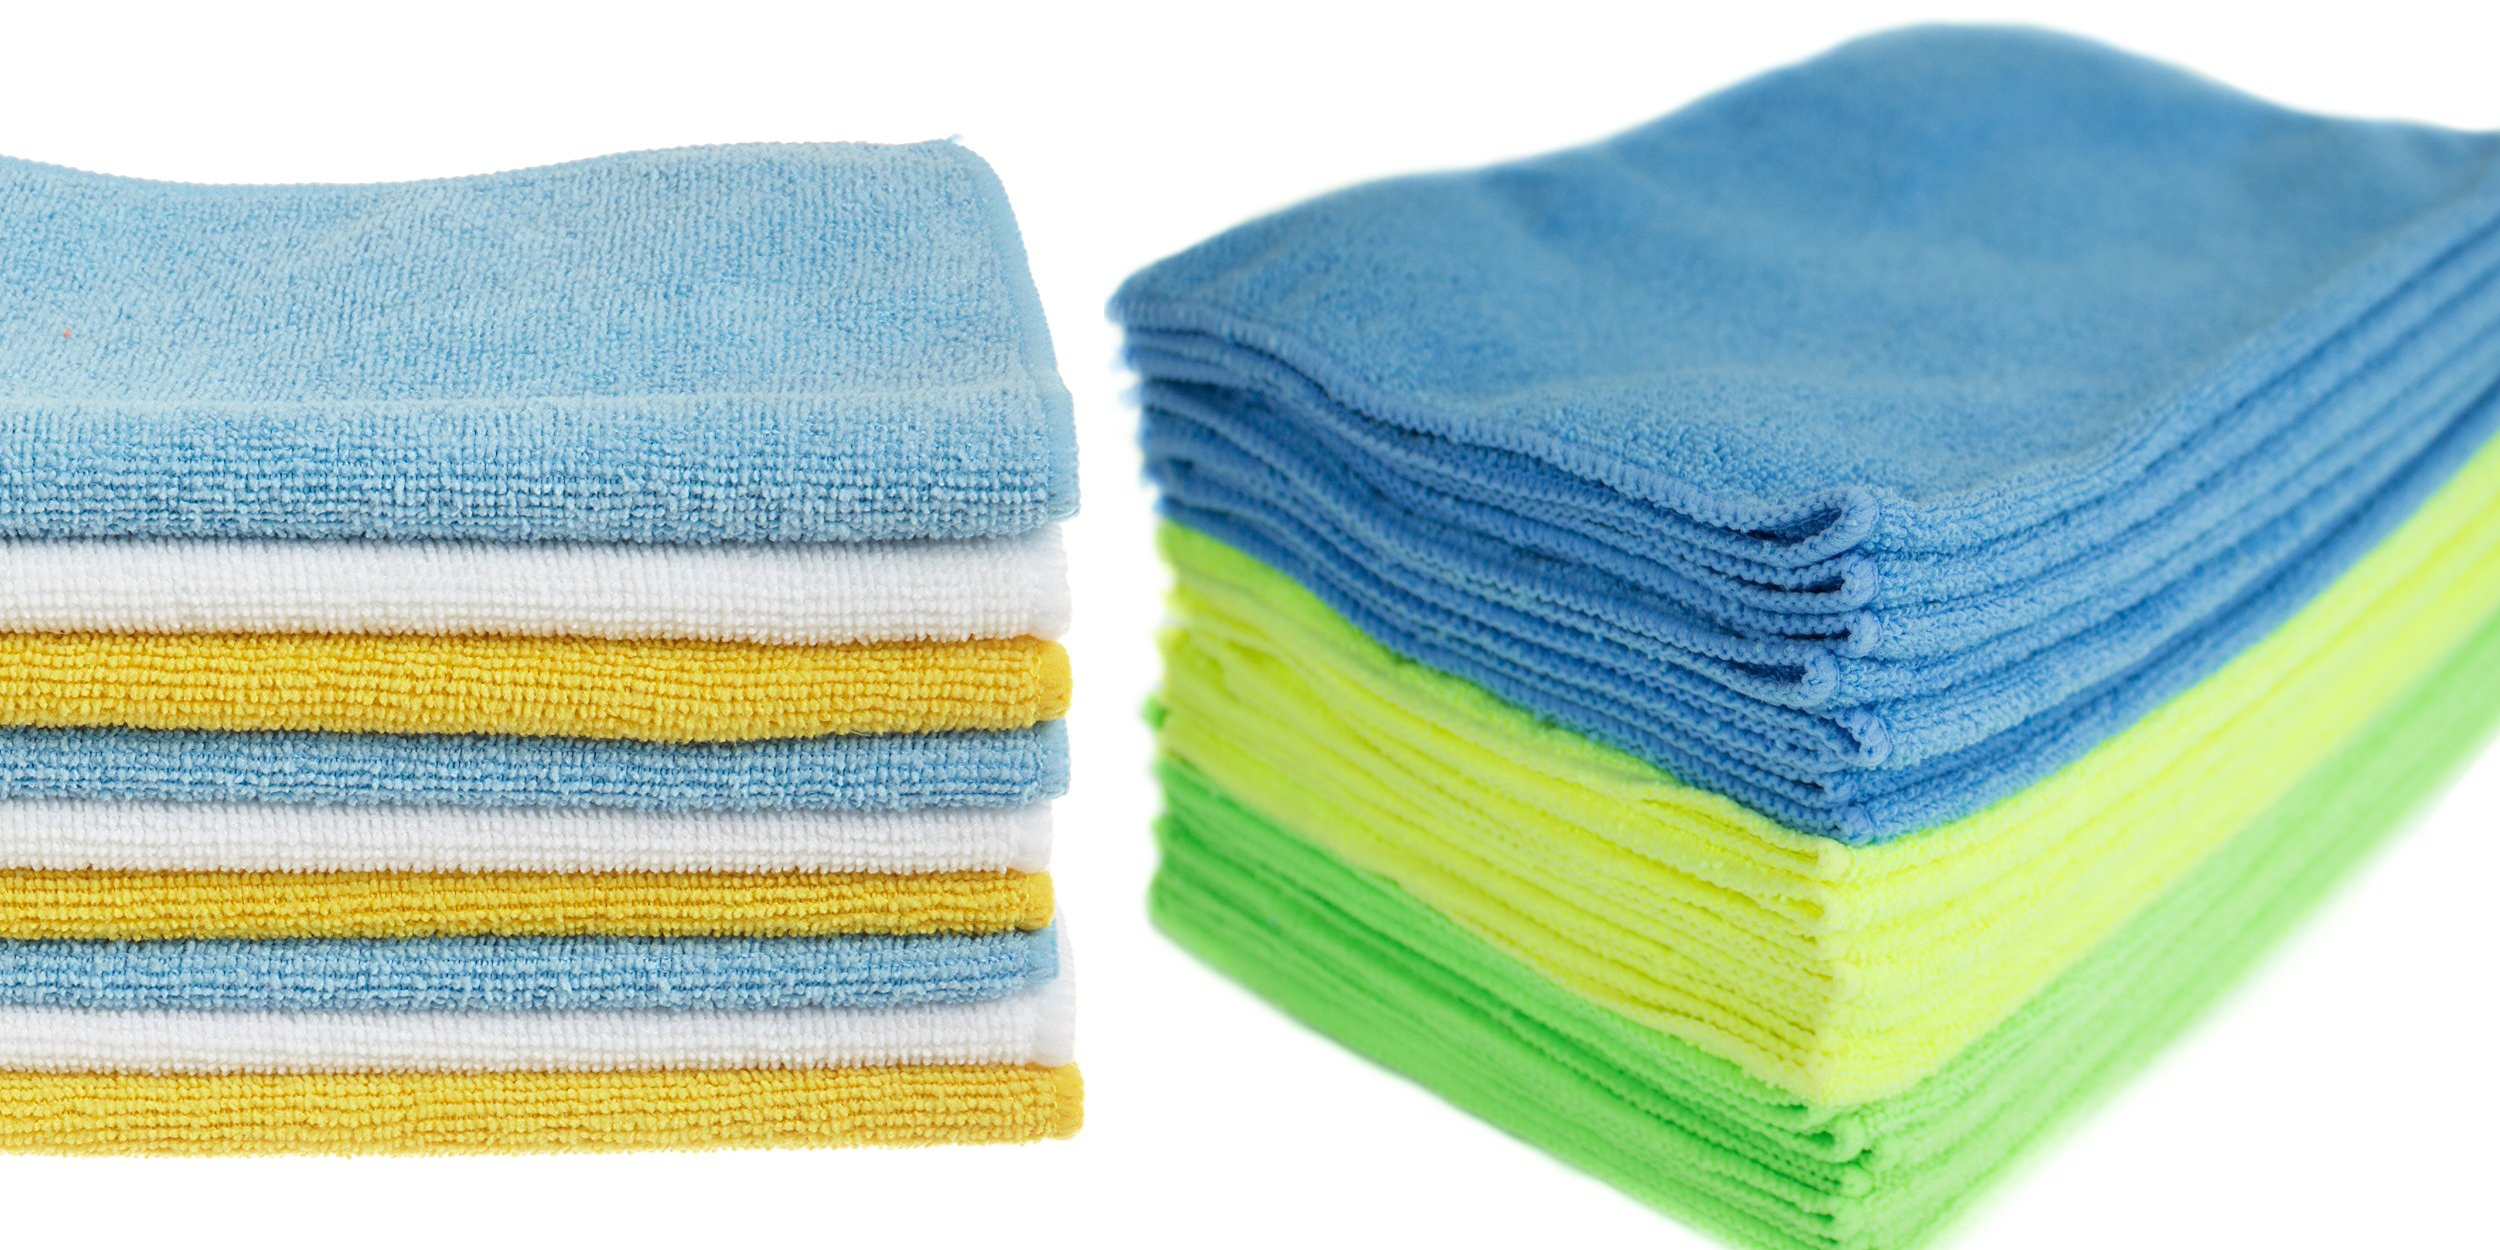 AmazonBasics Microfiber Cleaning Cloths: 24-pack from $7 Prime shipped ...